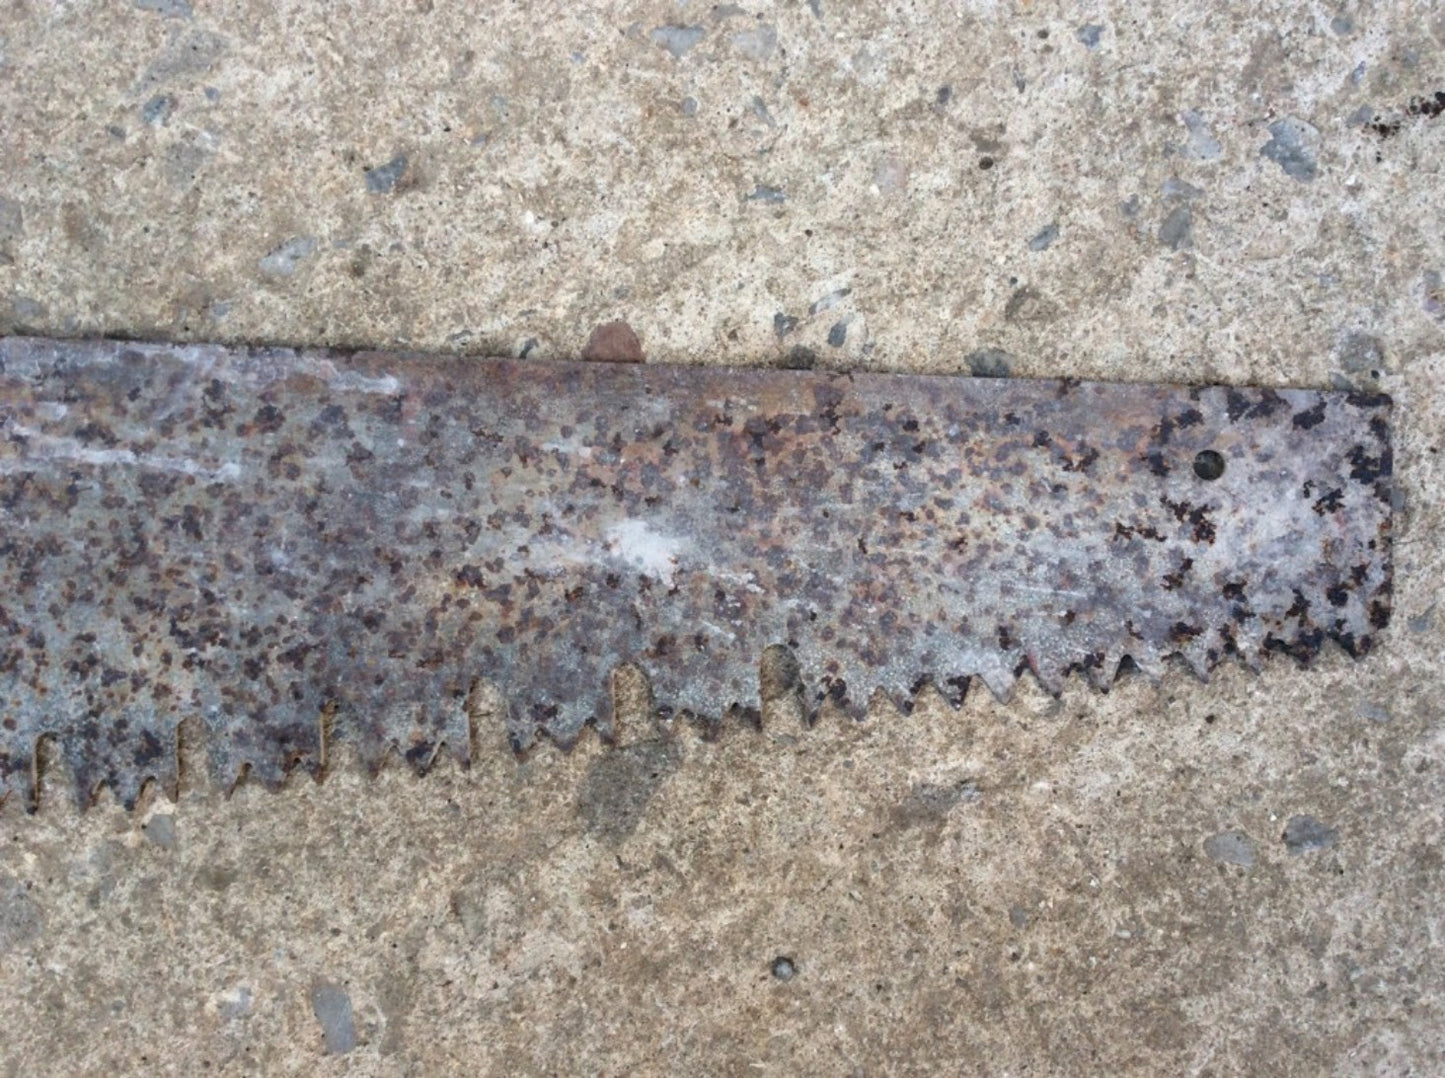 99cm Long Vintage Reclaimed Steel Old Stone Limestone Cutting Saw Collectable